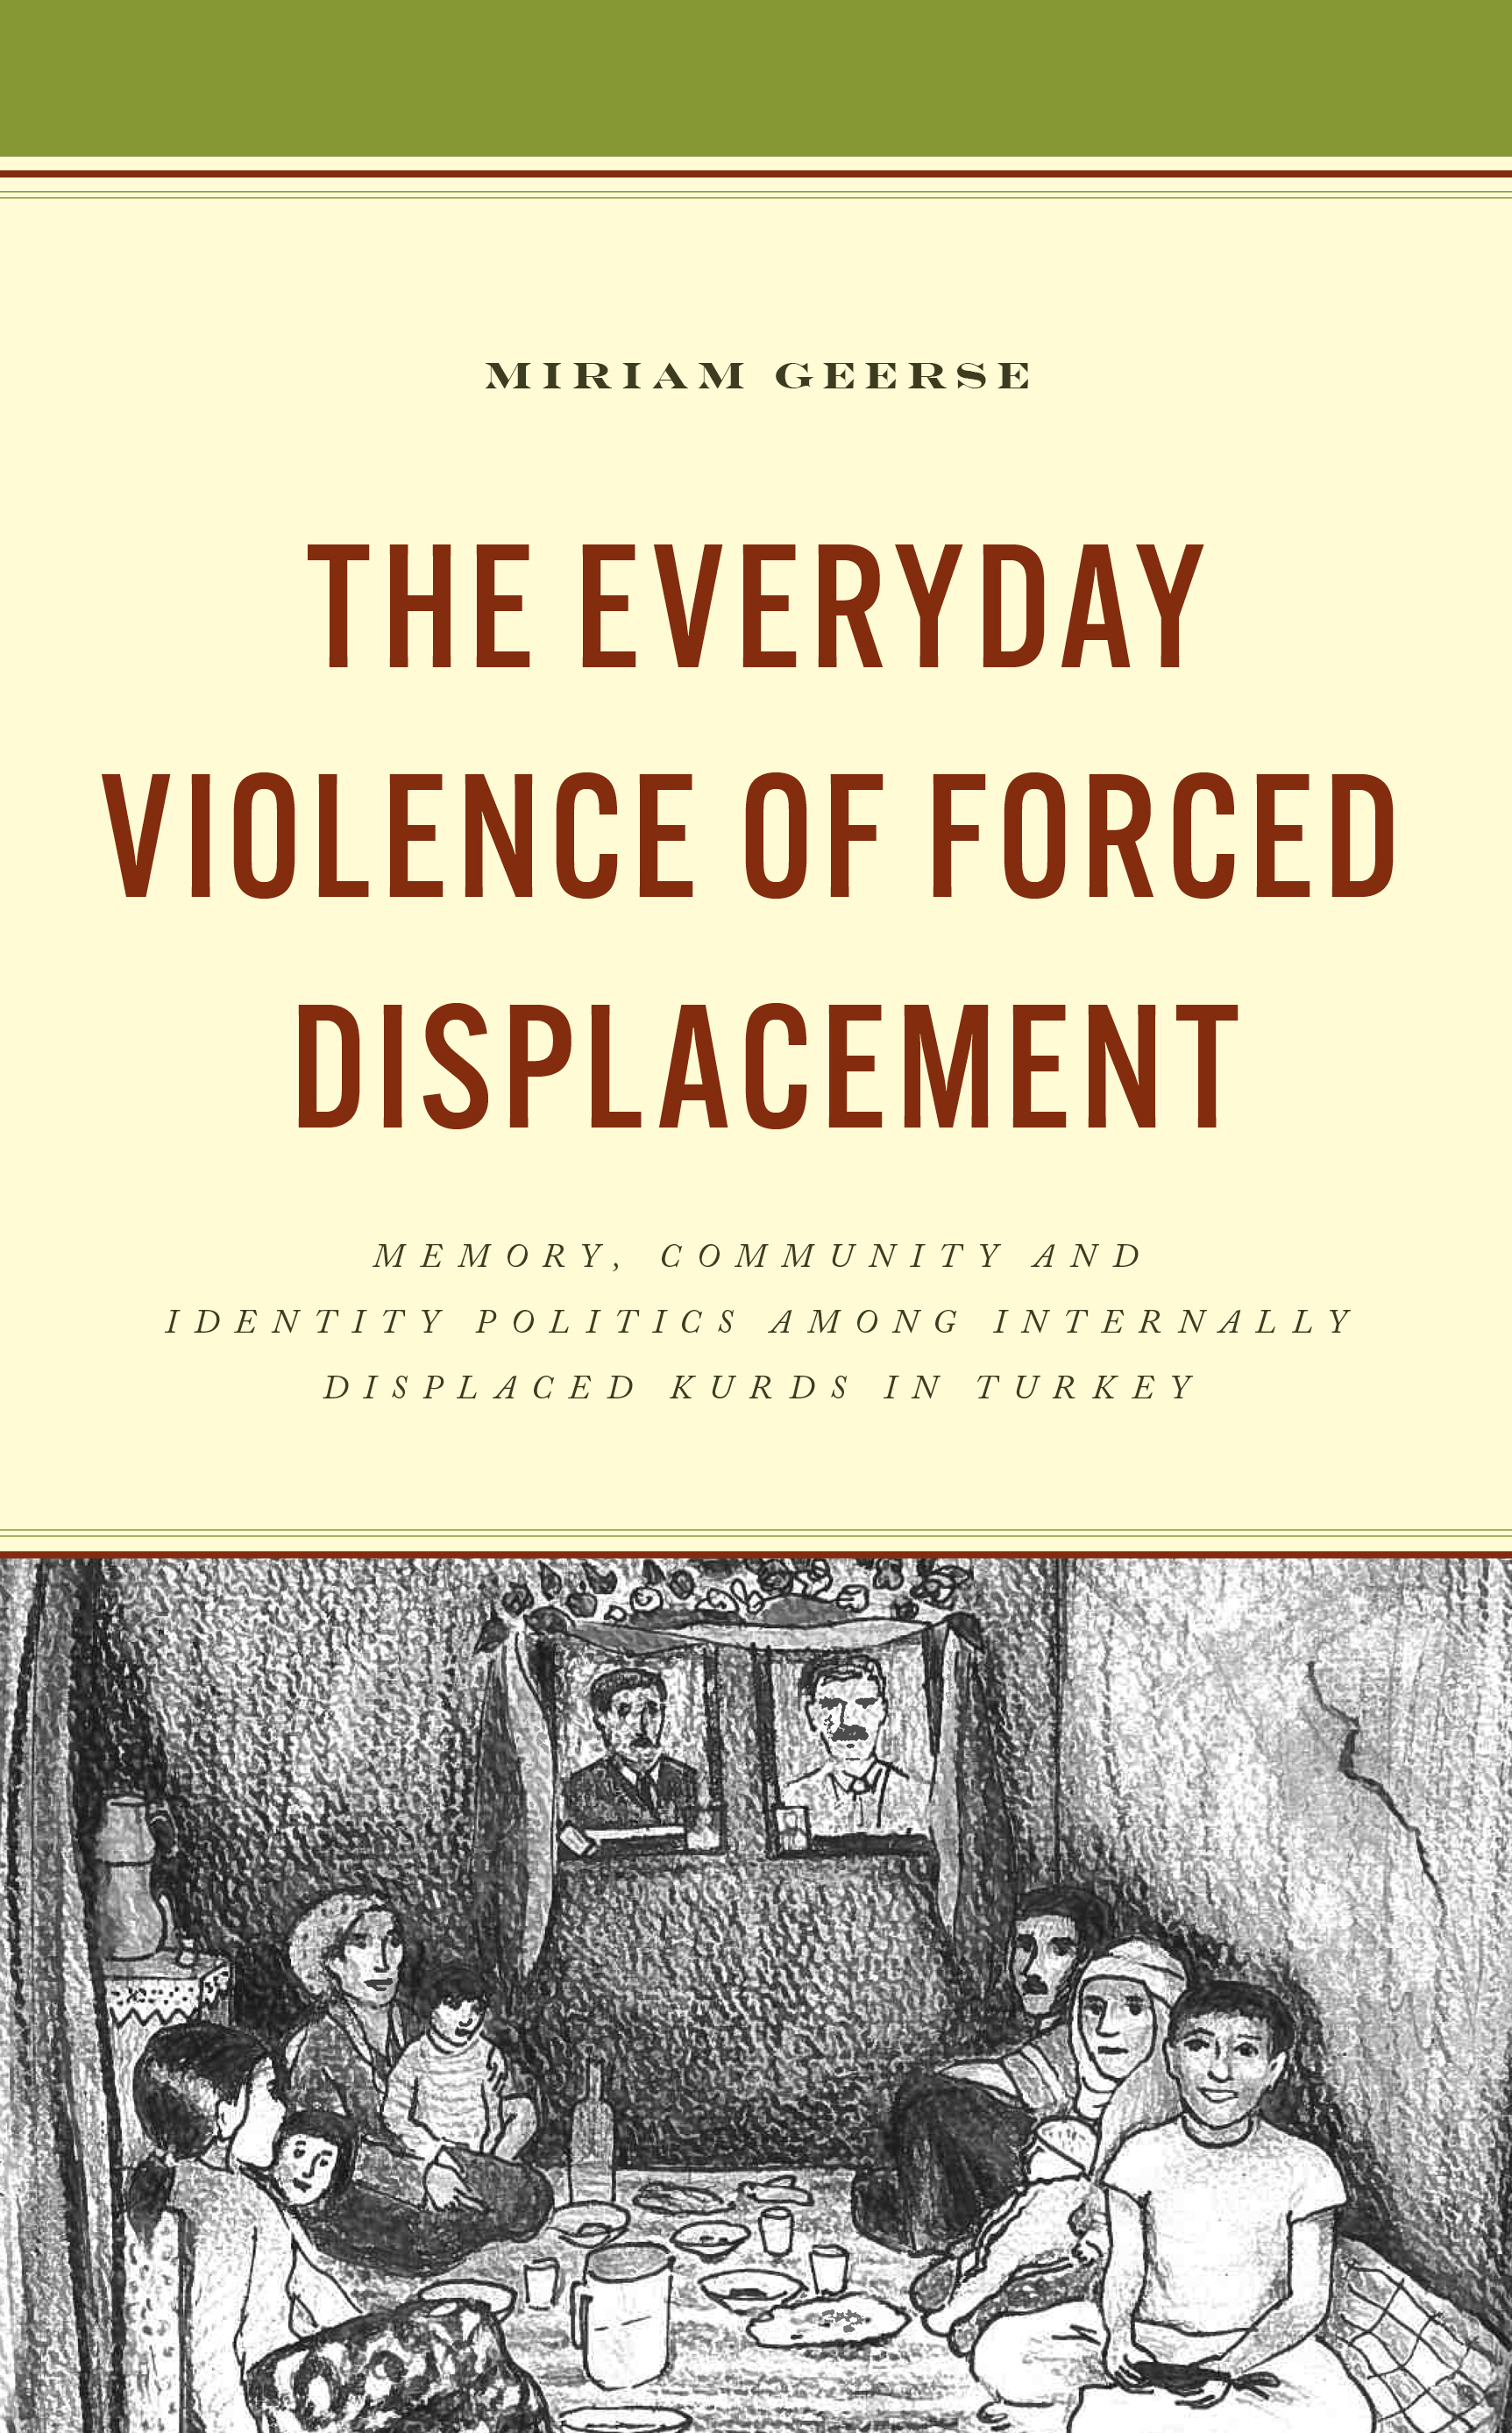 The Everyday Violence of Forced Displacement: Memory, Community and Identity Politics among Internally Displaced Kurds in Turkey